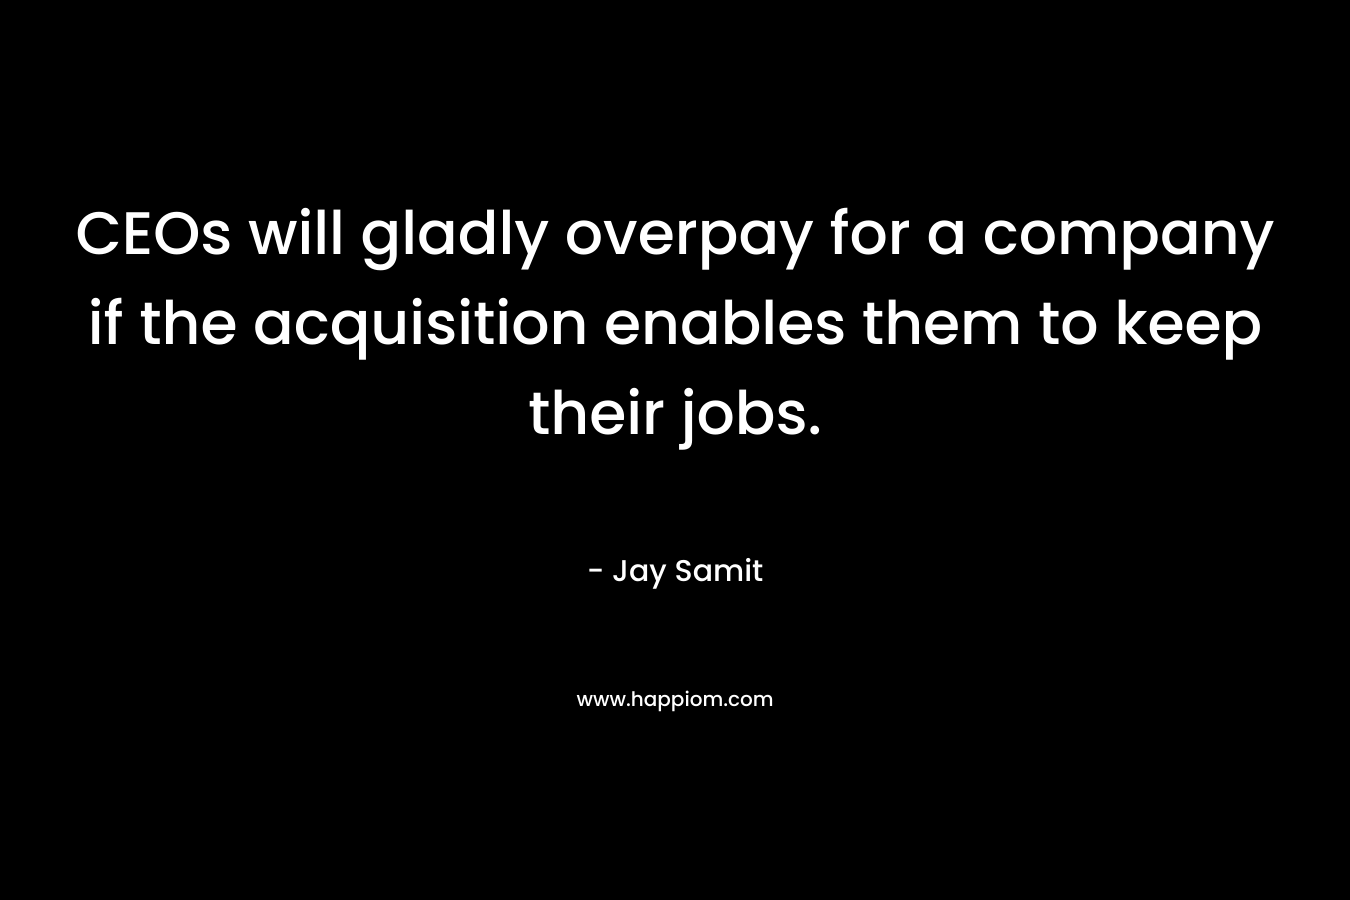 CEOs will gladly overpay for a company if the acquisition enables them to keep their jobs. – Jay Samit